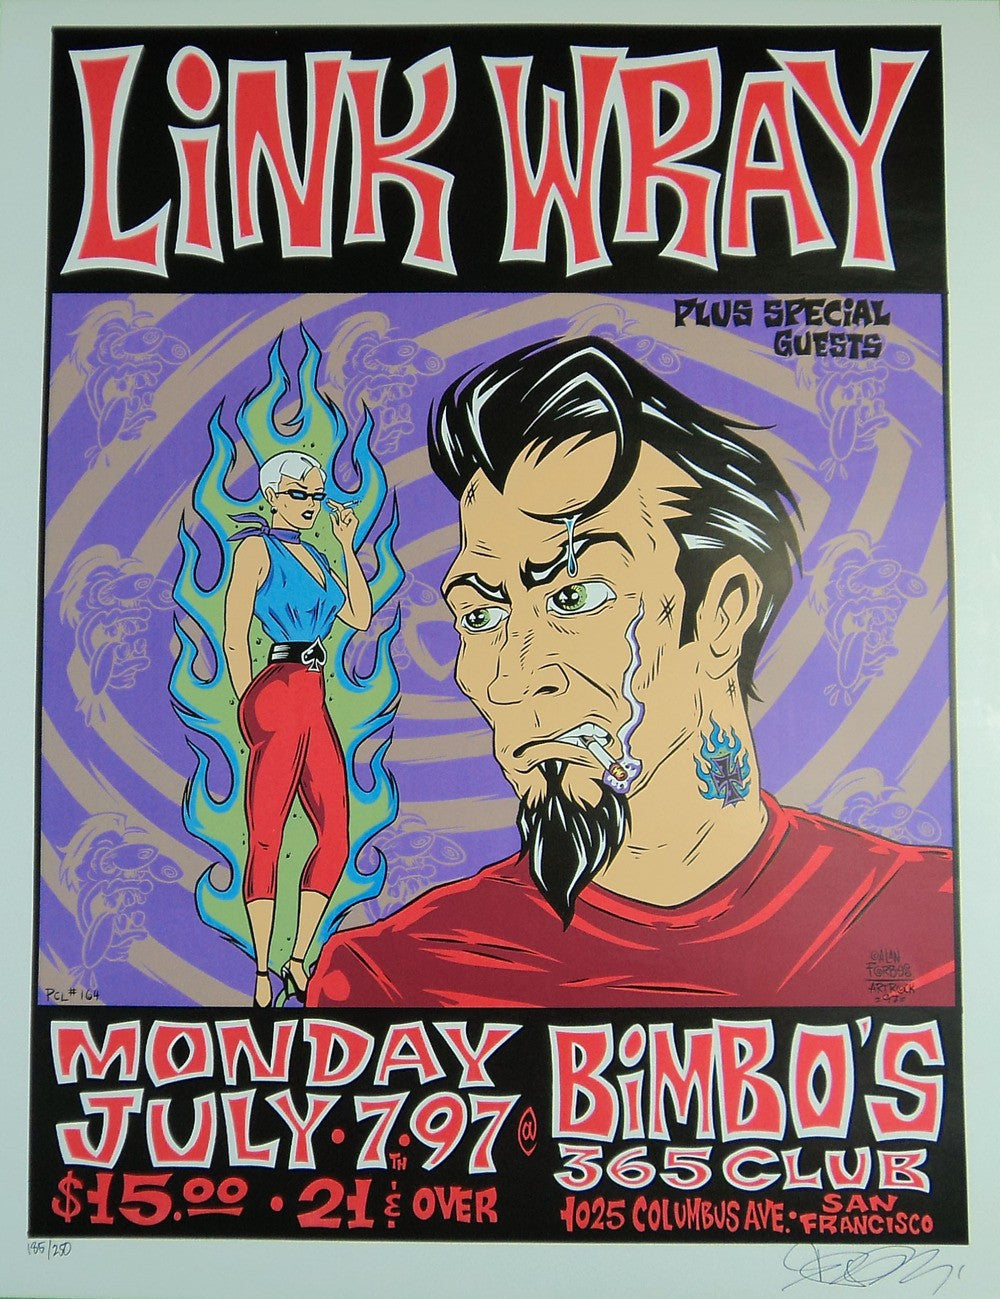 Alan Forbes - 1997 - Link Wray Concert Poster